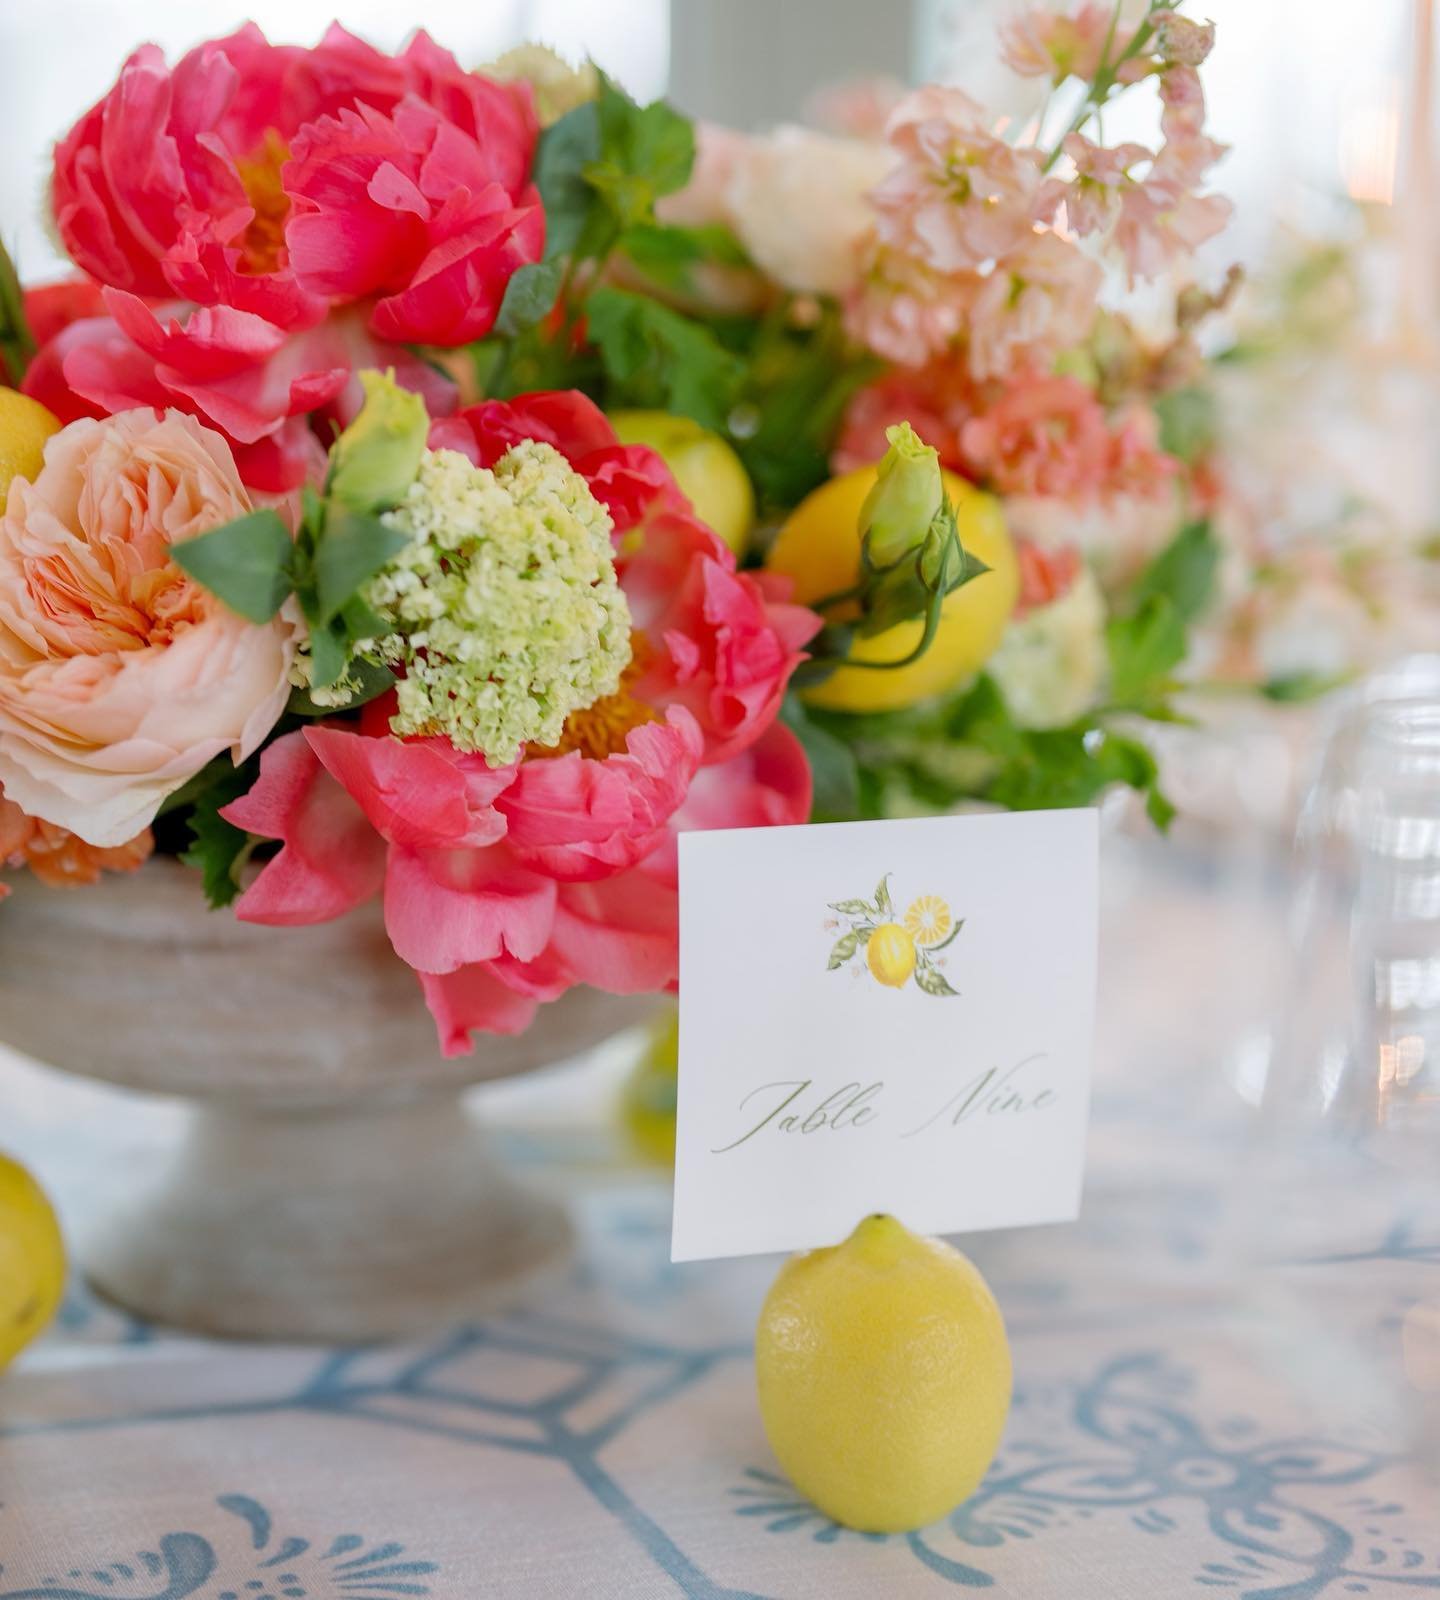 when the table number is just as pretty as the tablescape 🍋 

personalize this very own table number on our website: whitley script in olive ink + the lemon motif.